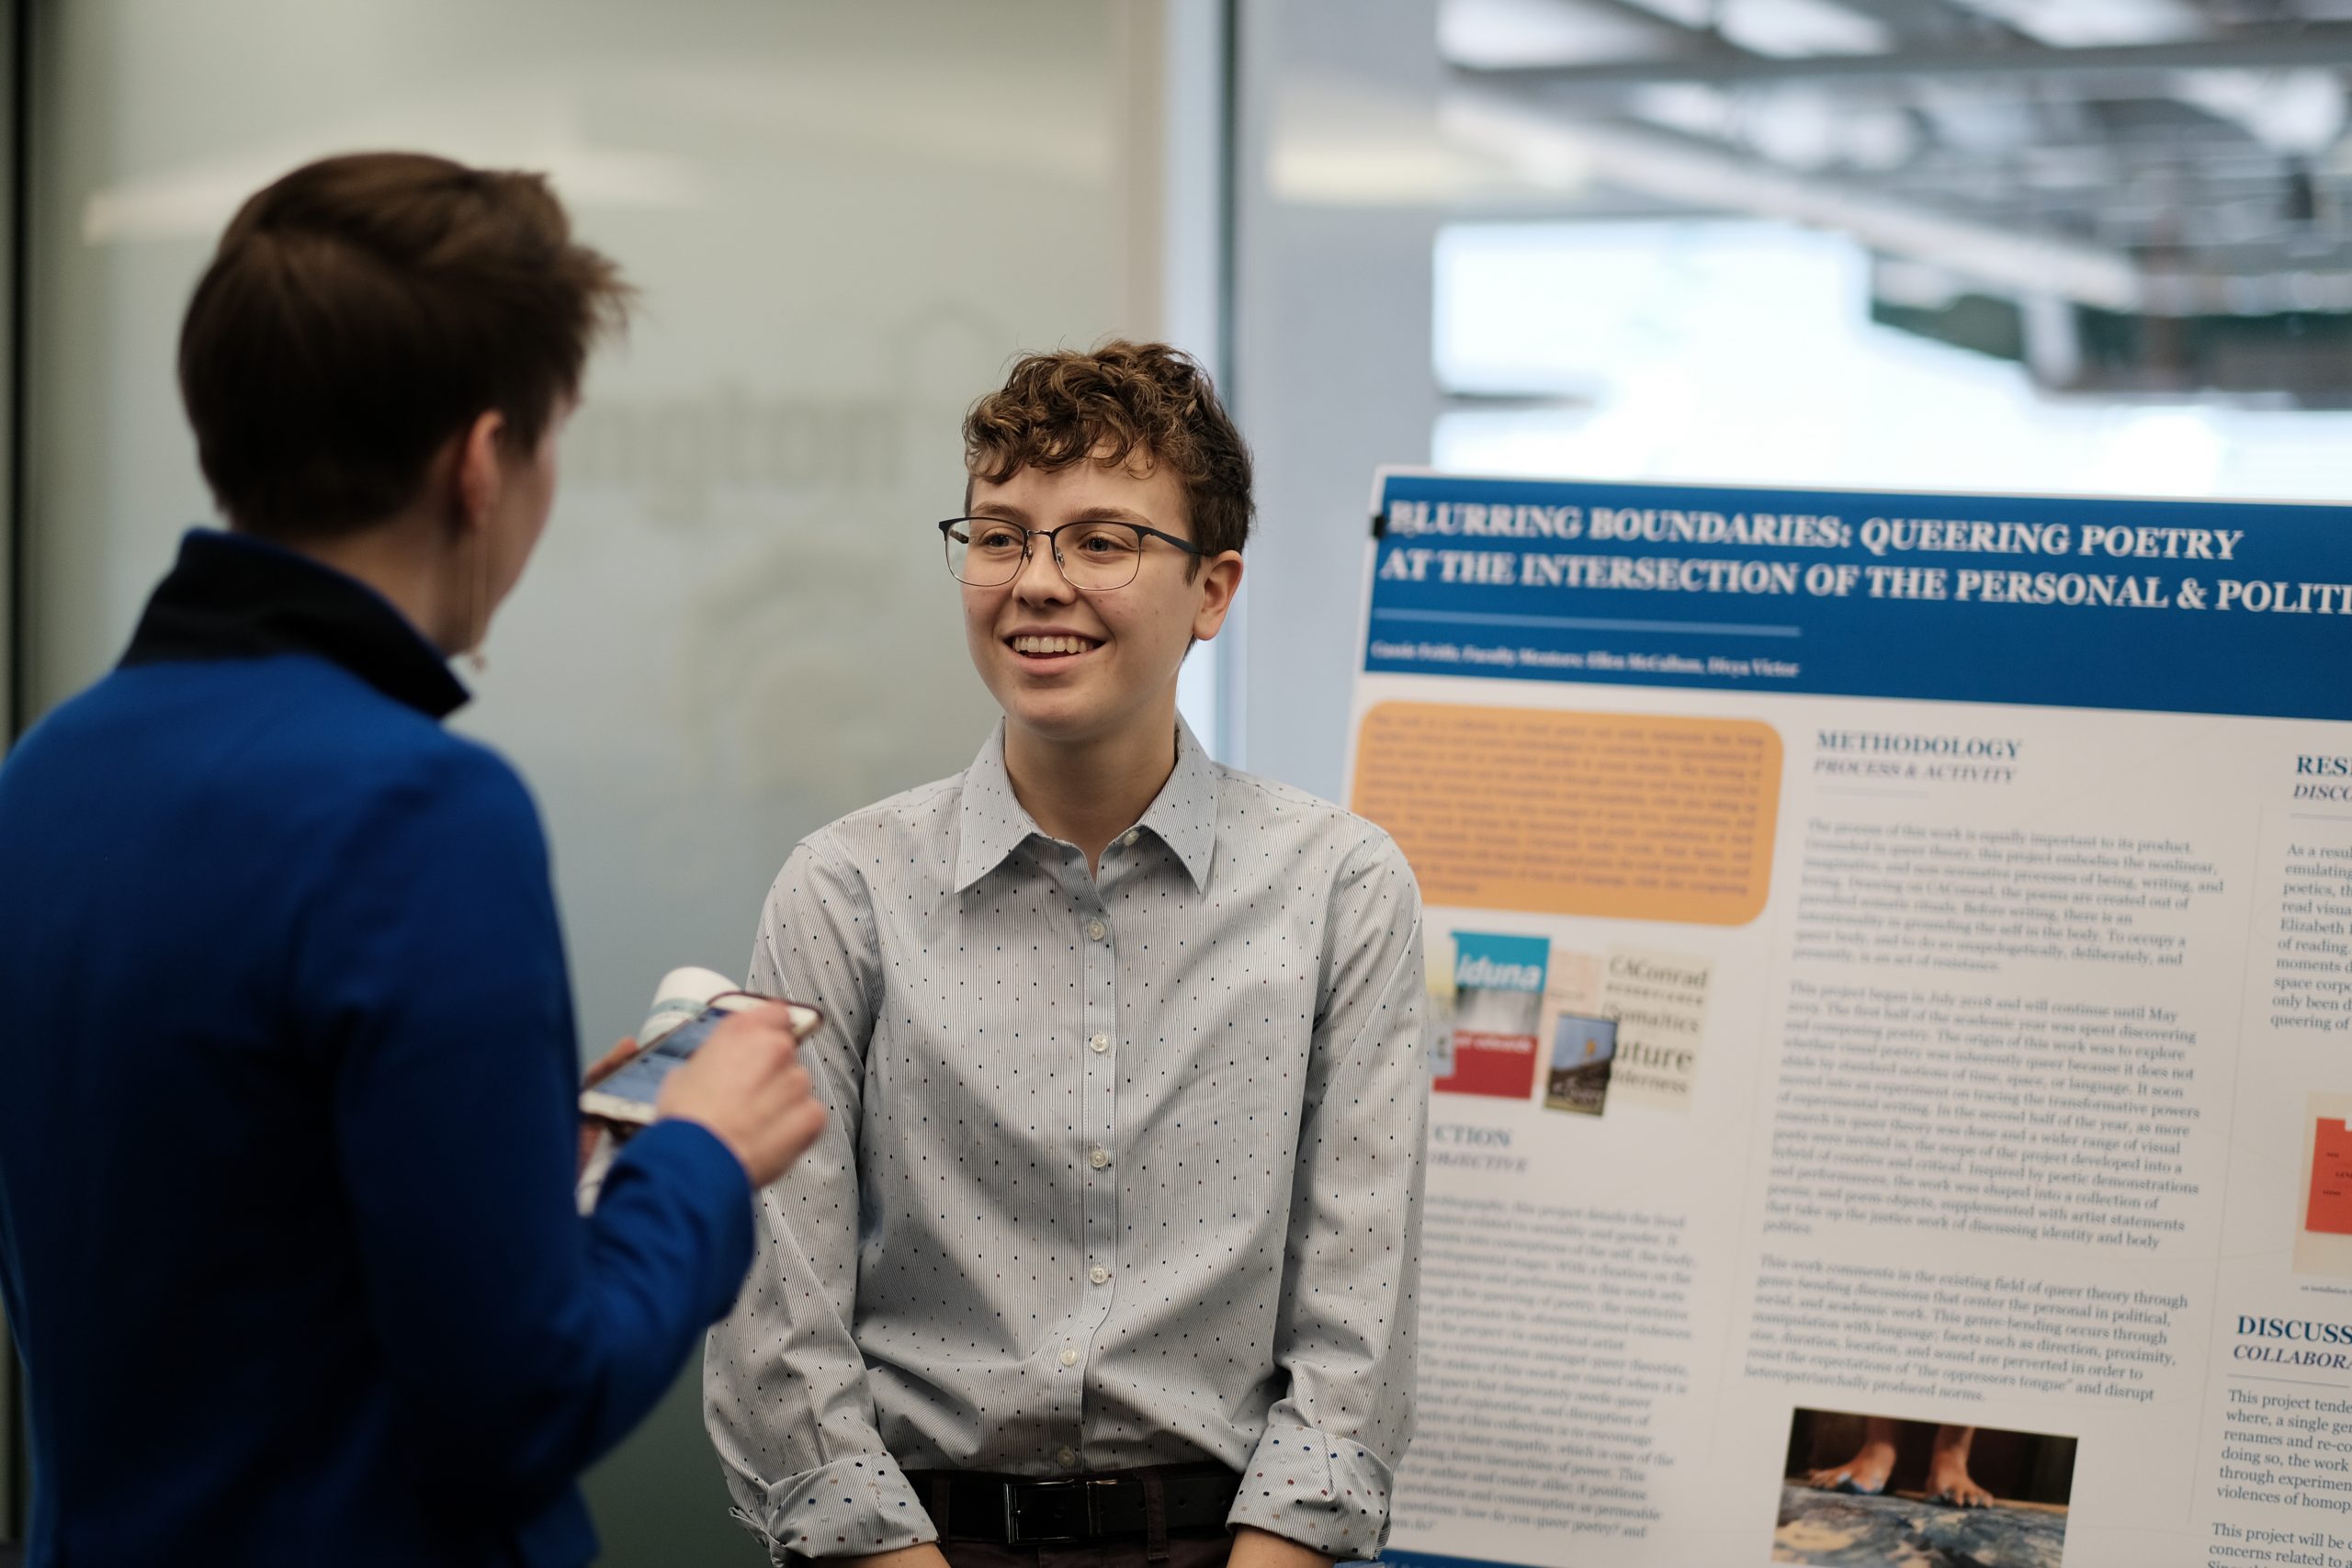 Student poster presenting at an event